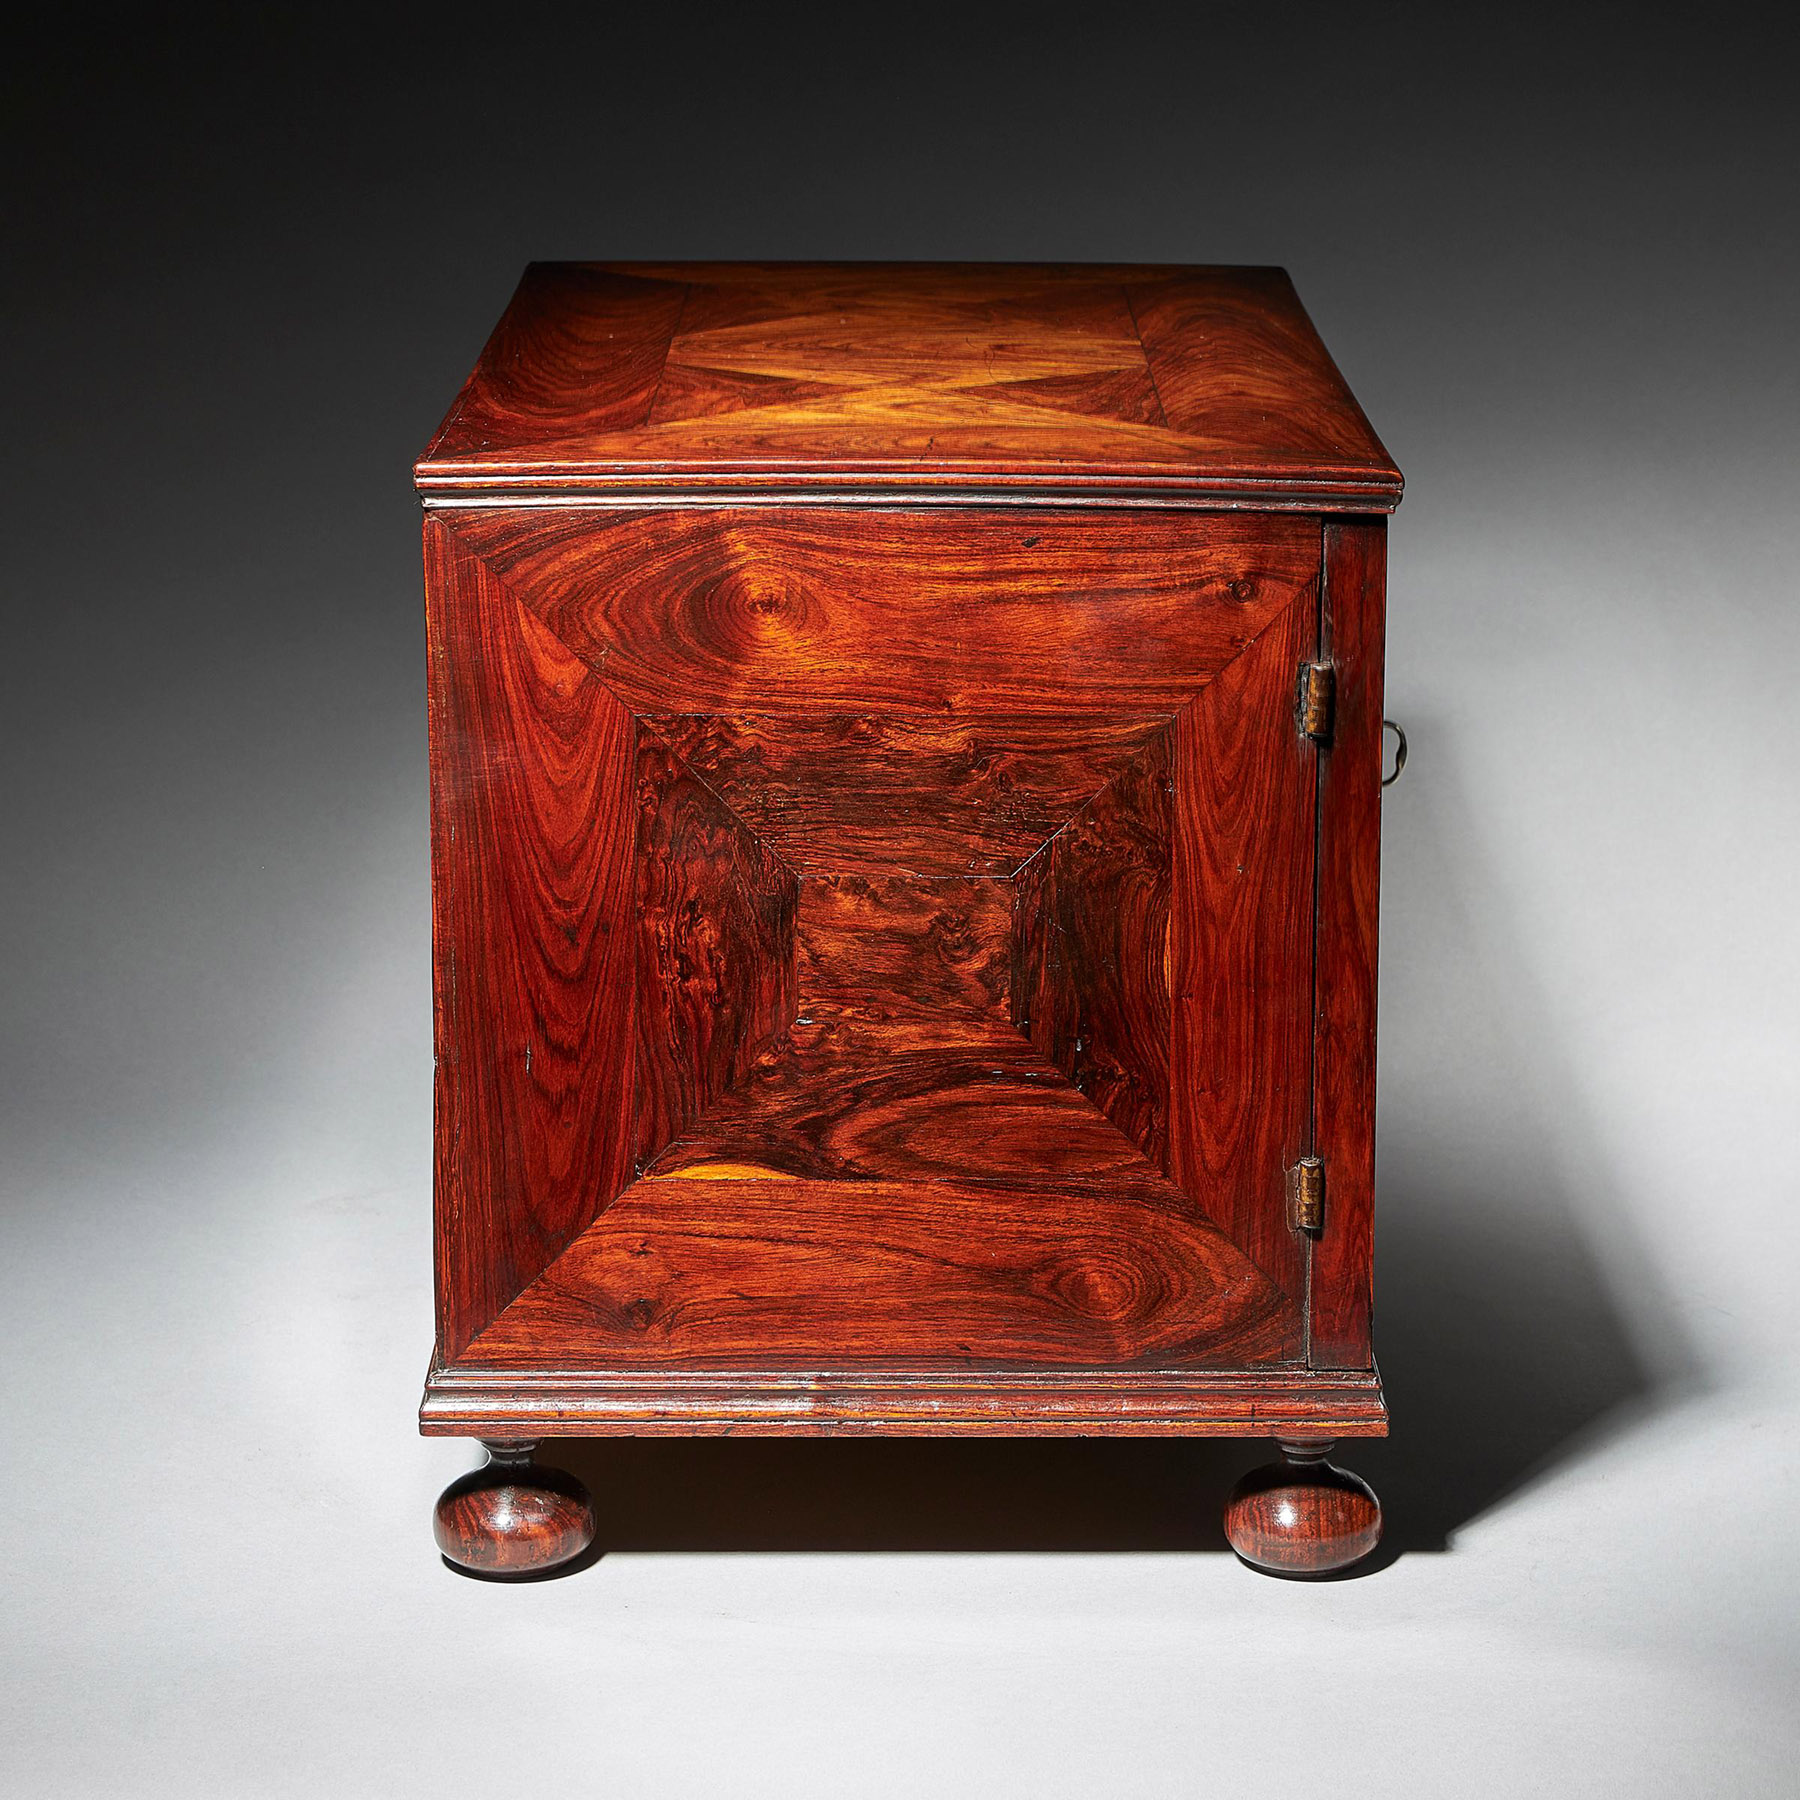 Extremely Rare and Fine Miniature Kingwood Table Cabinet from the Reign of Charles II 6